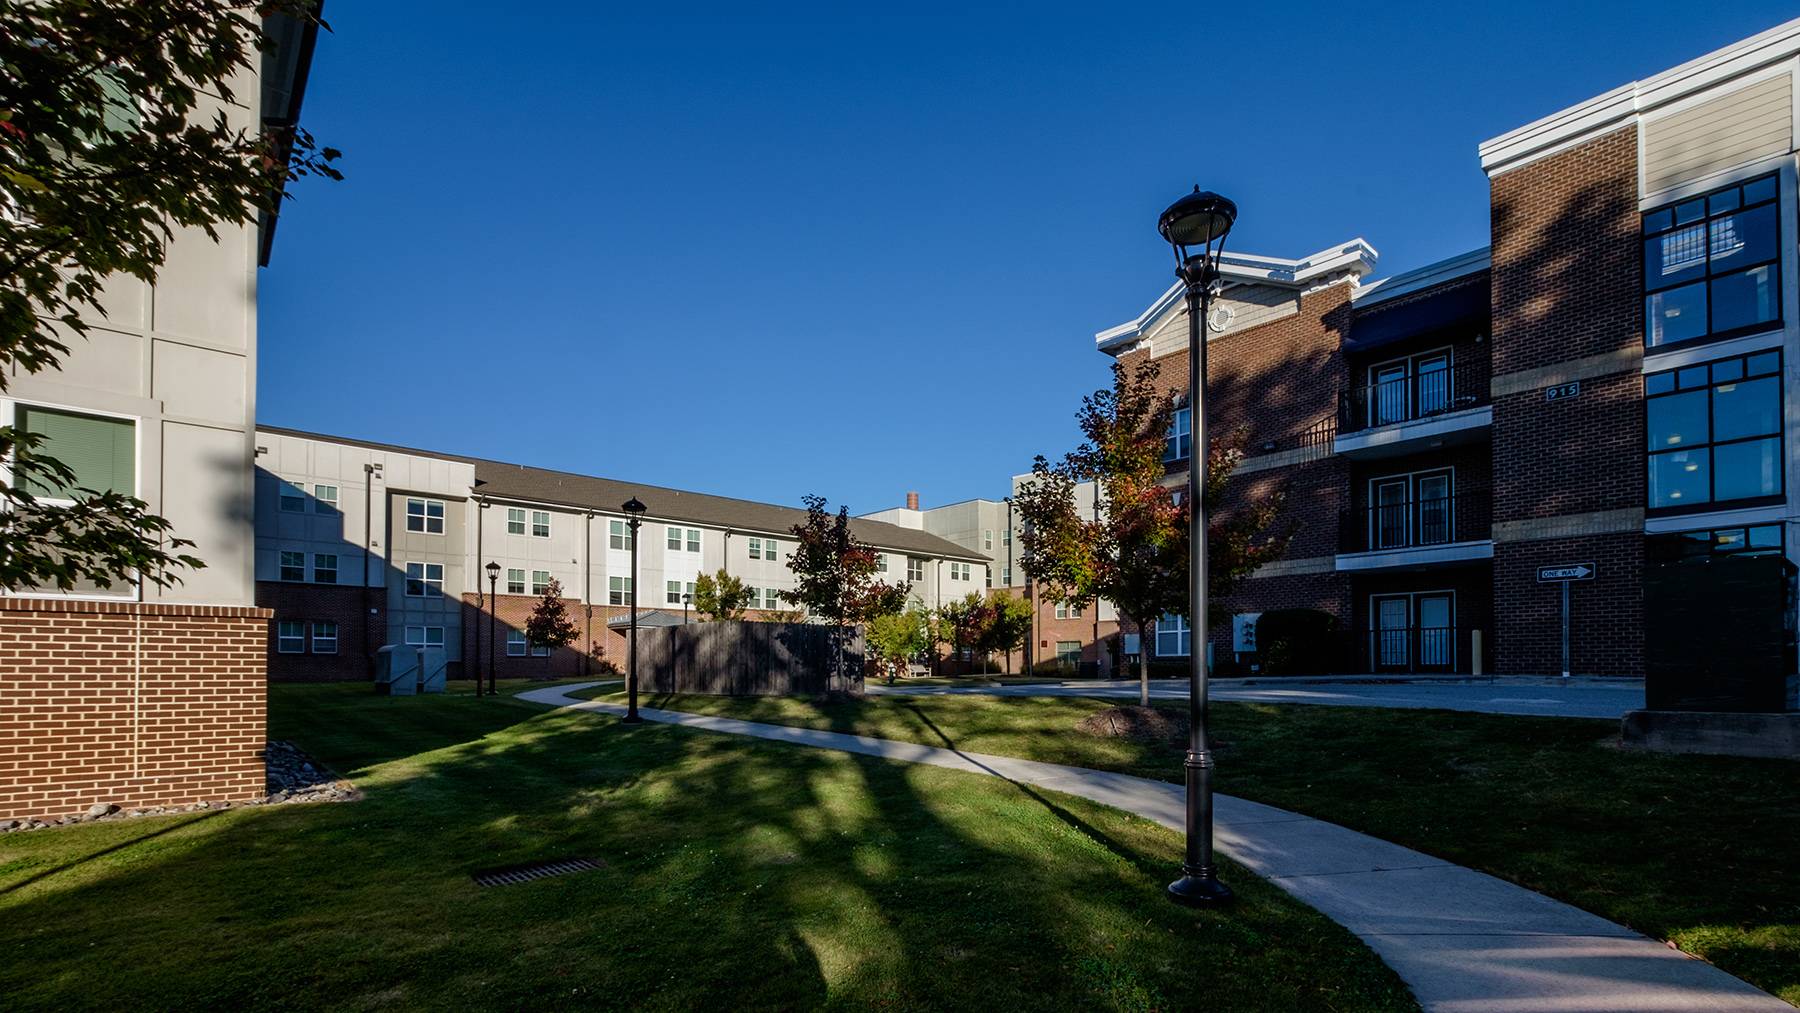 The Lofts on Lee residence hall is pictured with blue skies and late afternoon shadows.